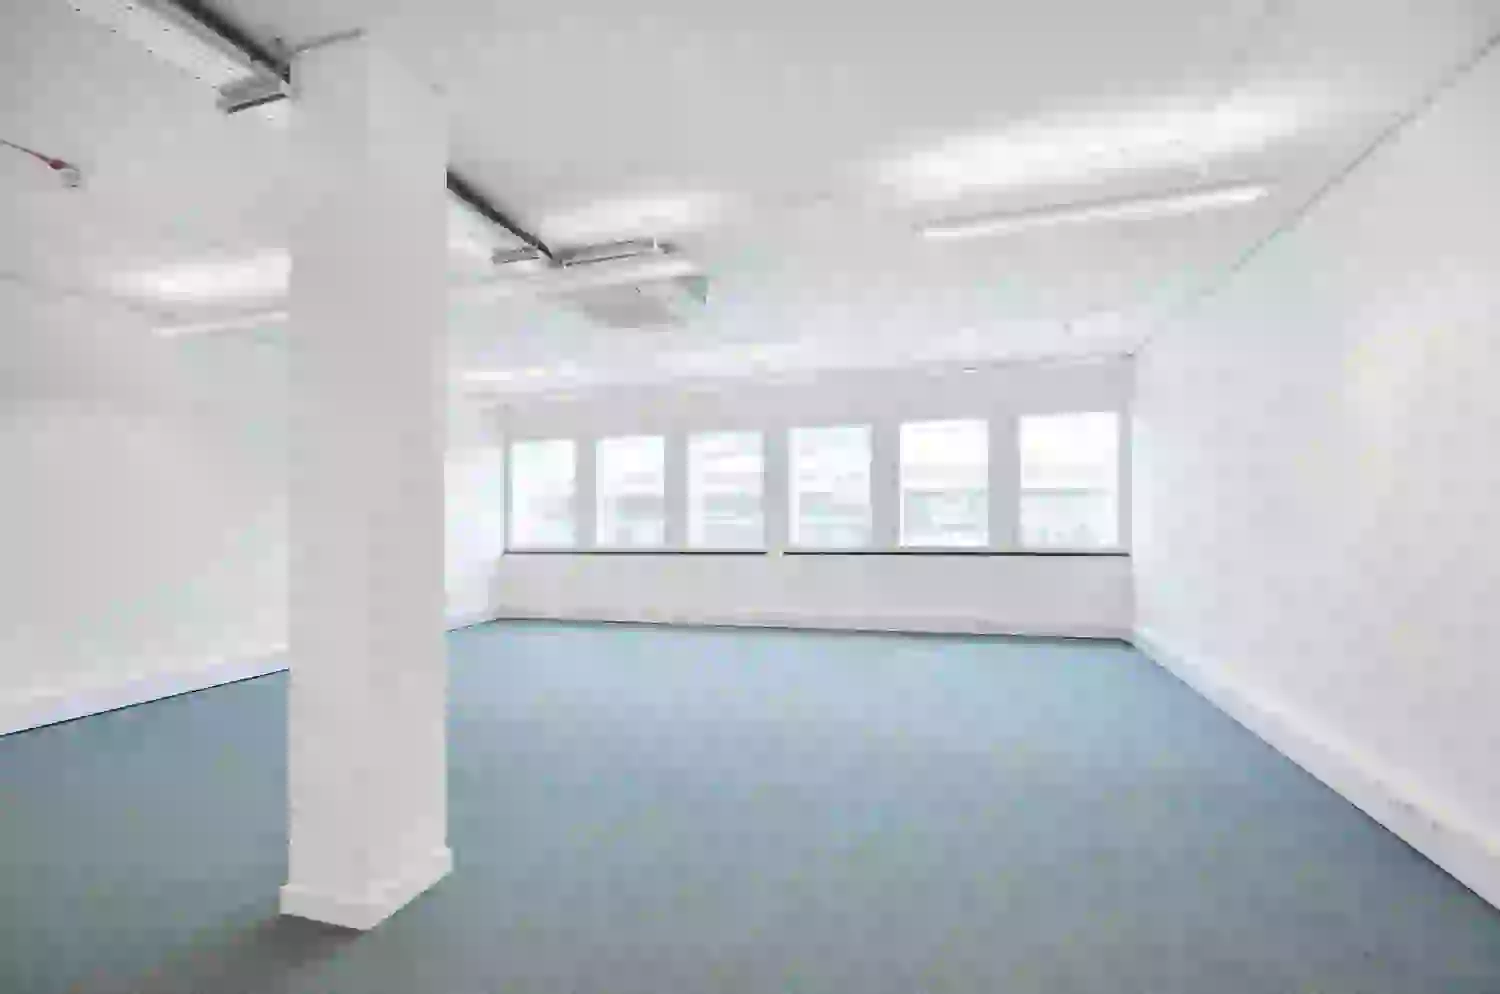 Office space to rent at Q West, Great West Road, Brentford, London, unit IH.1.06, 748 sq ft (69 sq m).